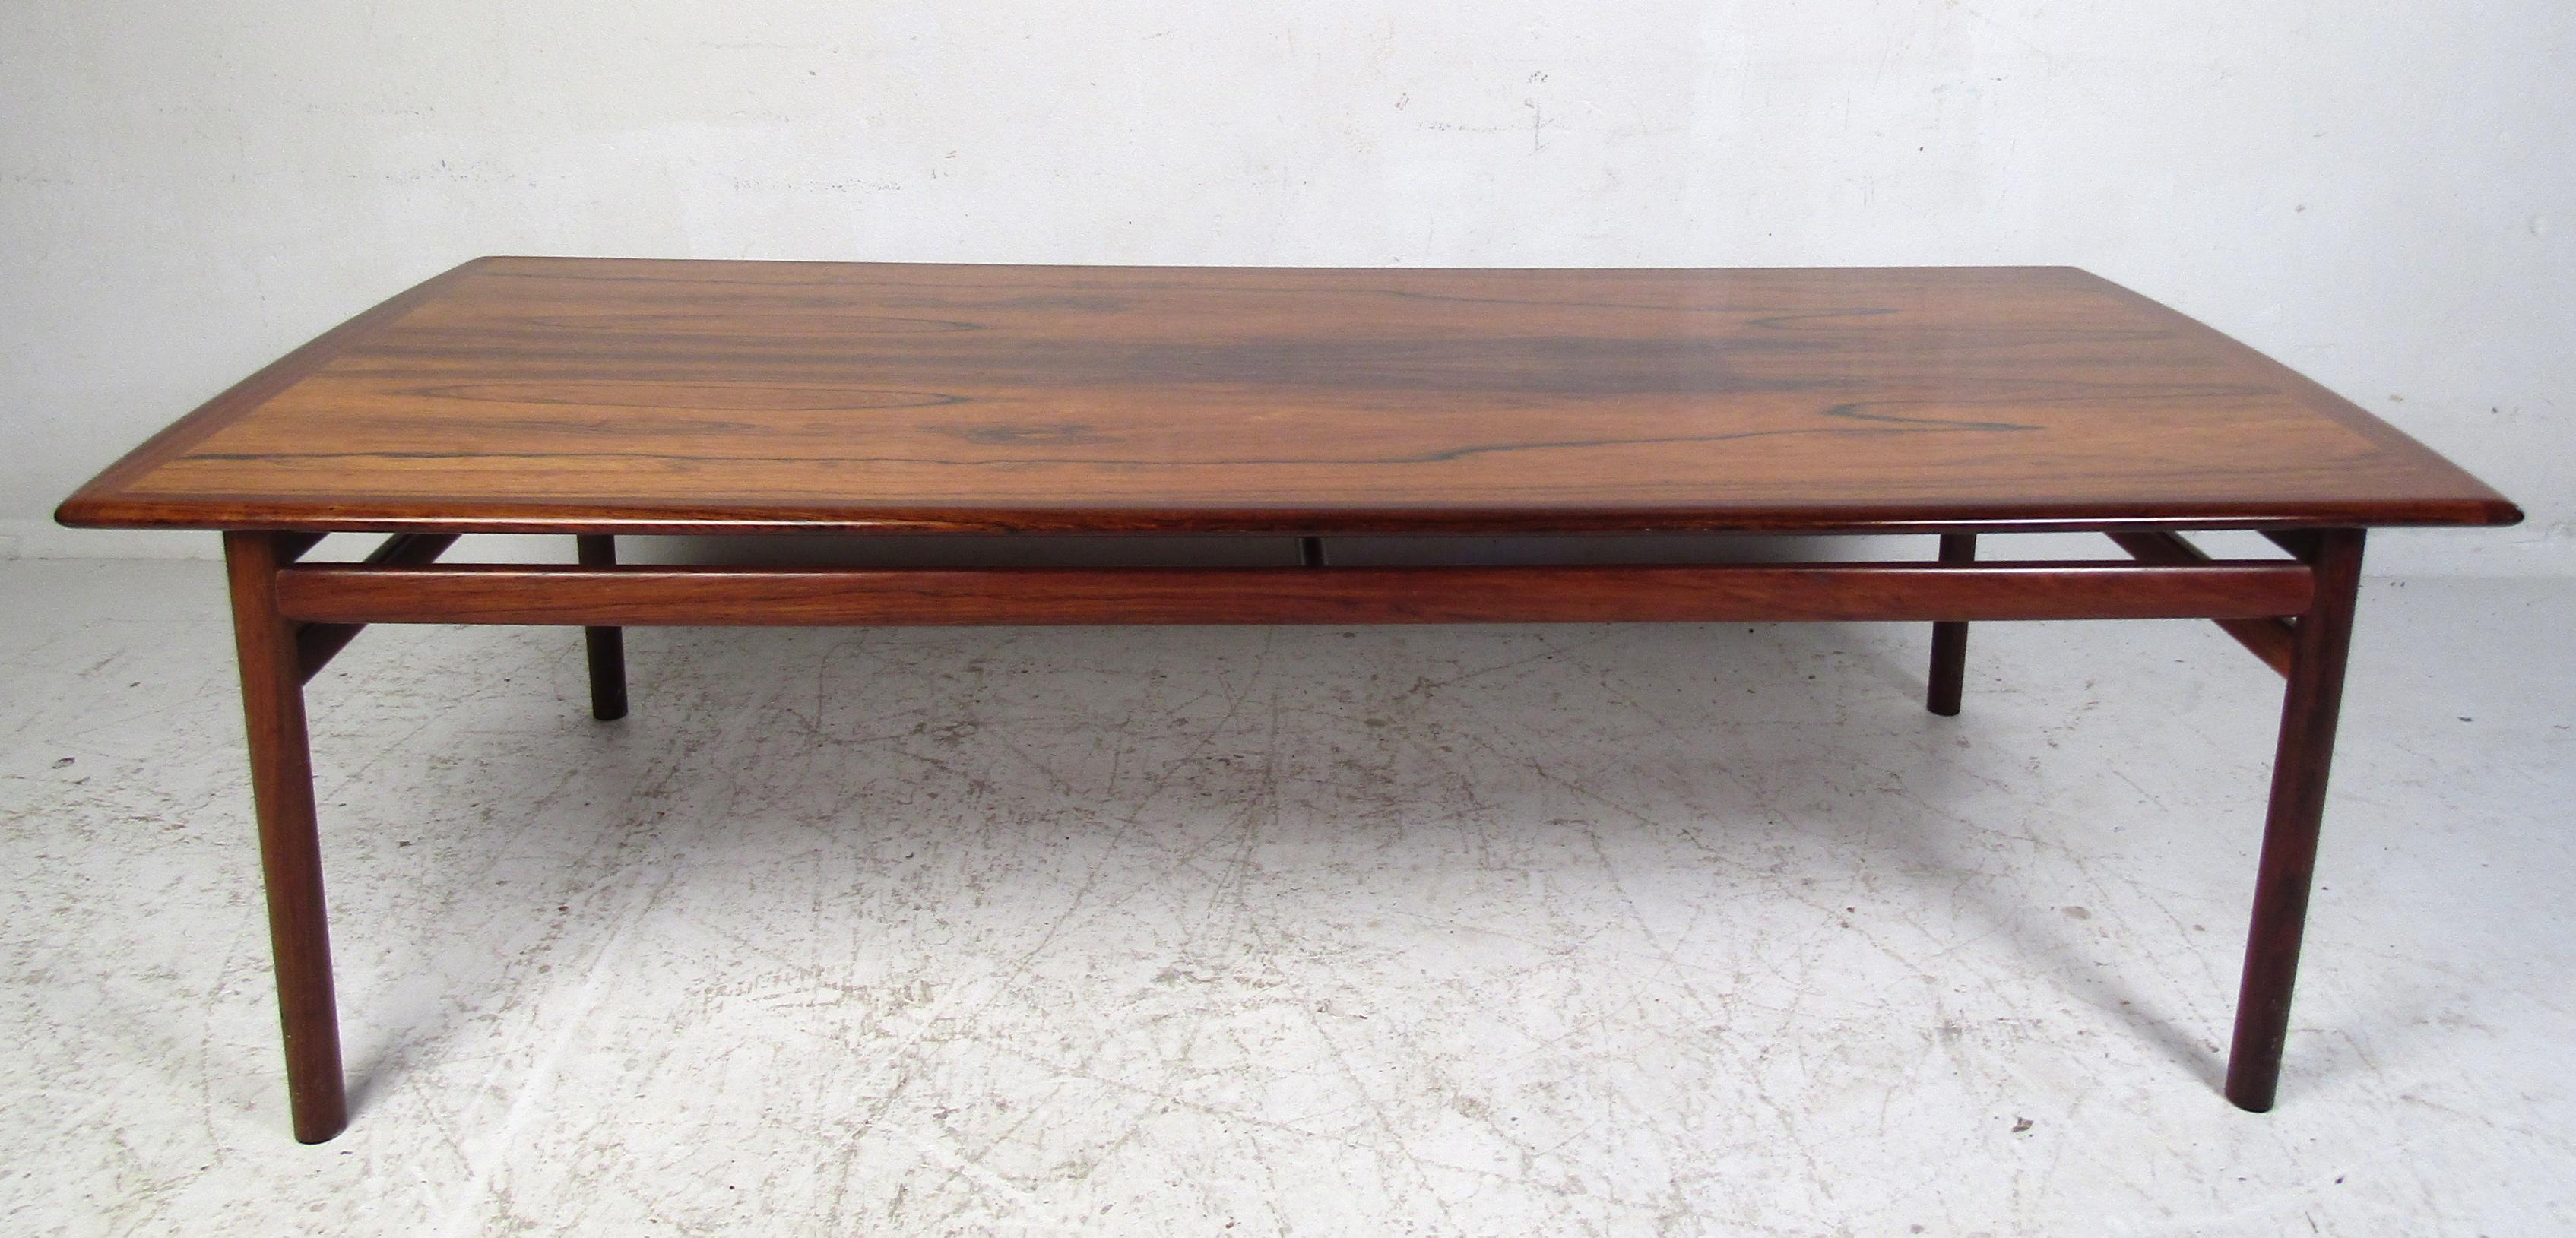 Elegant Danish modern rosewood coffee table with beautiful woodgrain throughout. This vintage rectangular coffee table boasts cylindrical legs connected by stretchers ensuring maximum sturdiness. The perfect addition to any home, business, or